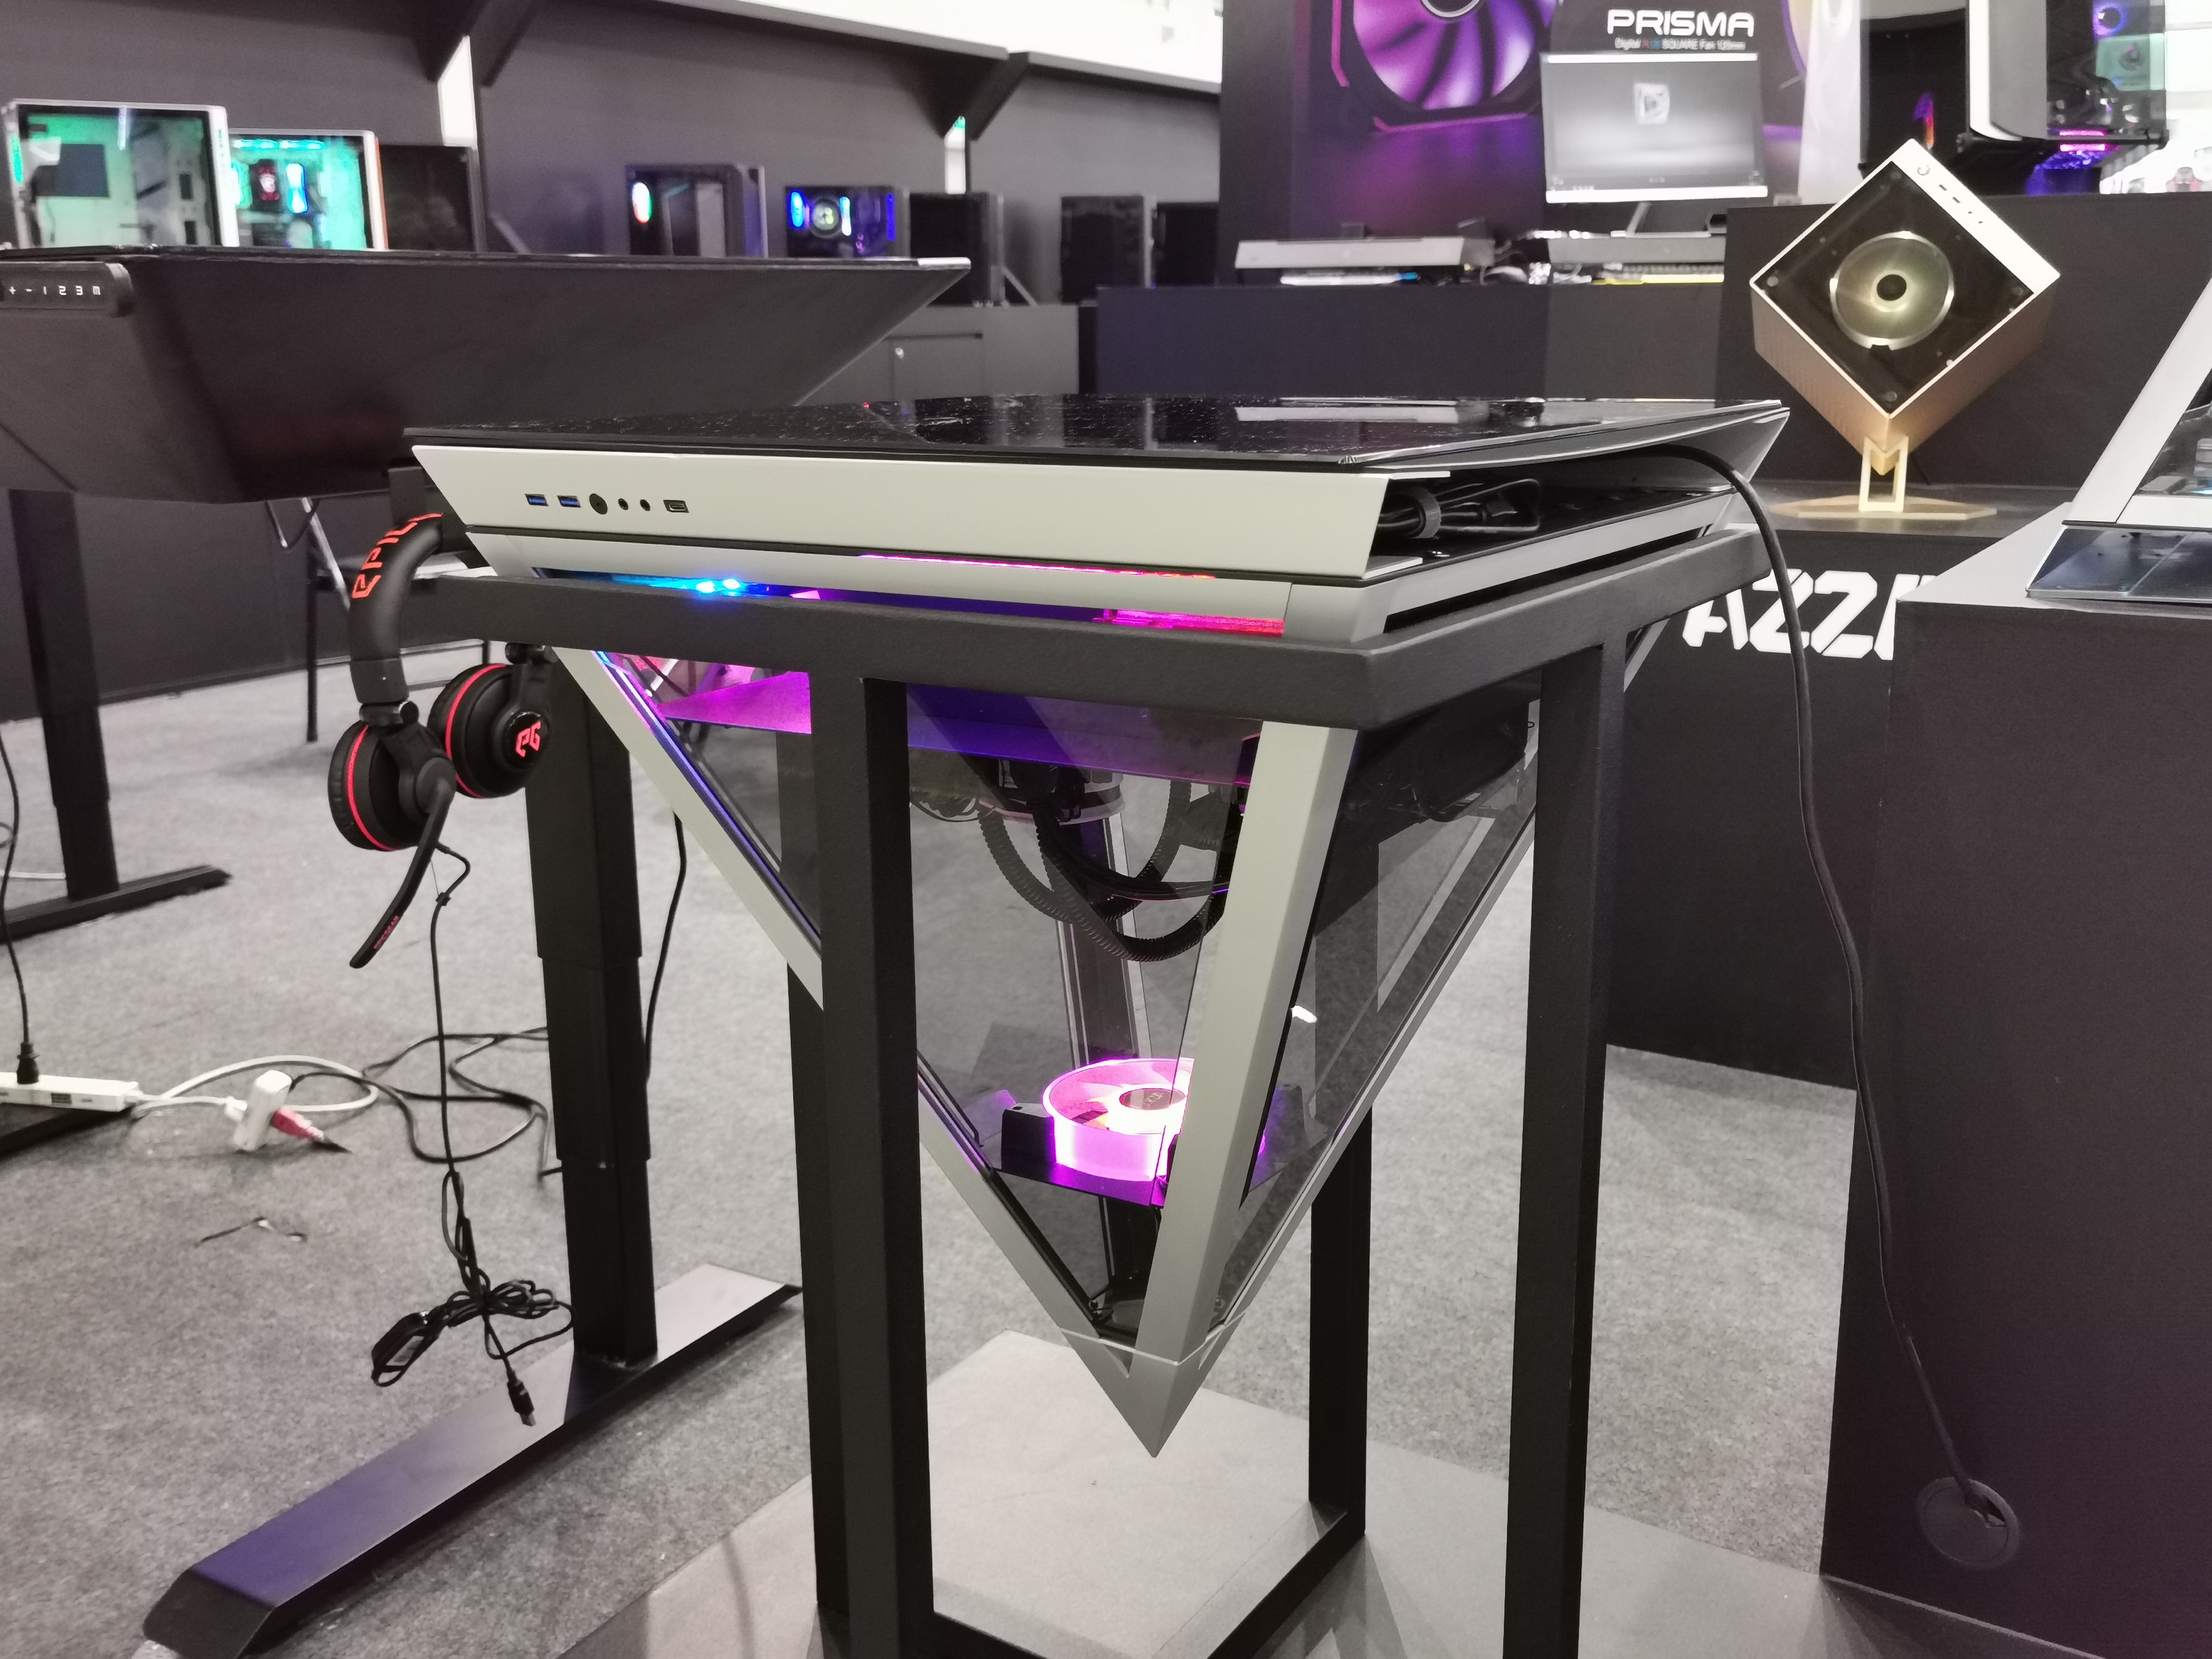 Azza S Pyramid Chassis The Up Side Down Case But Also A Table